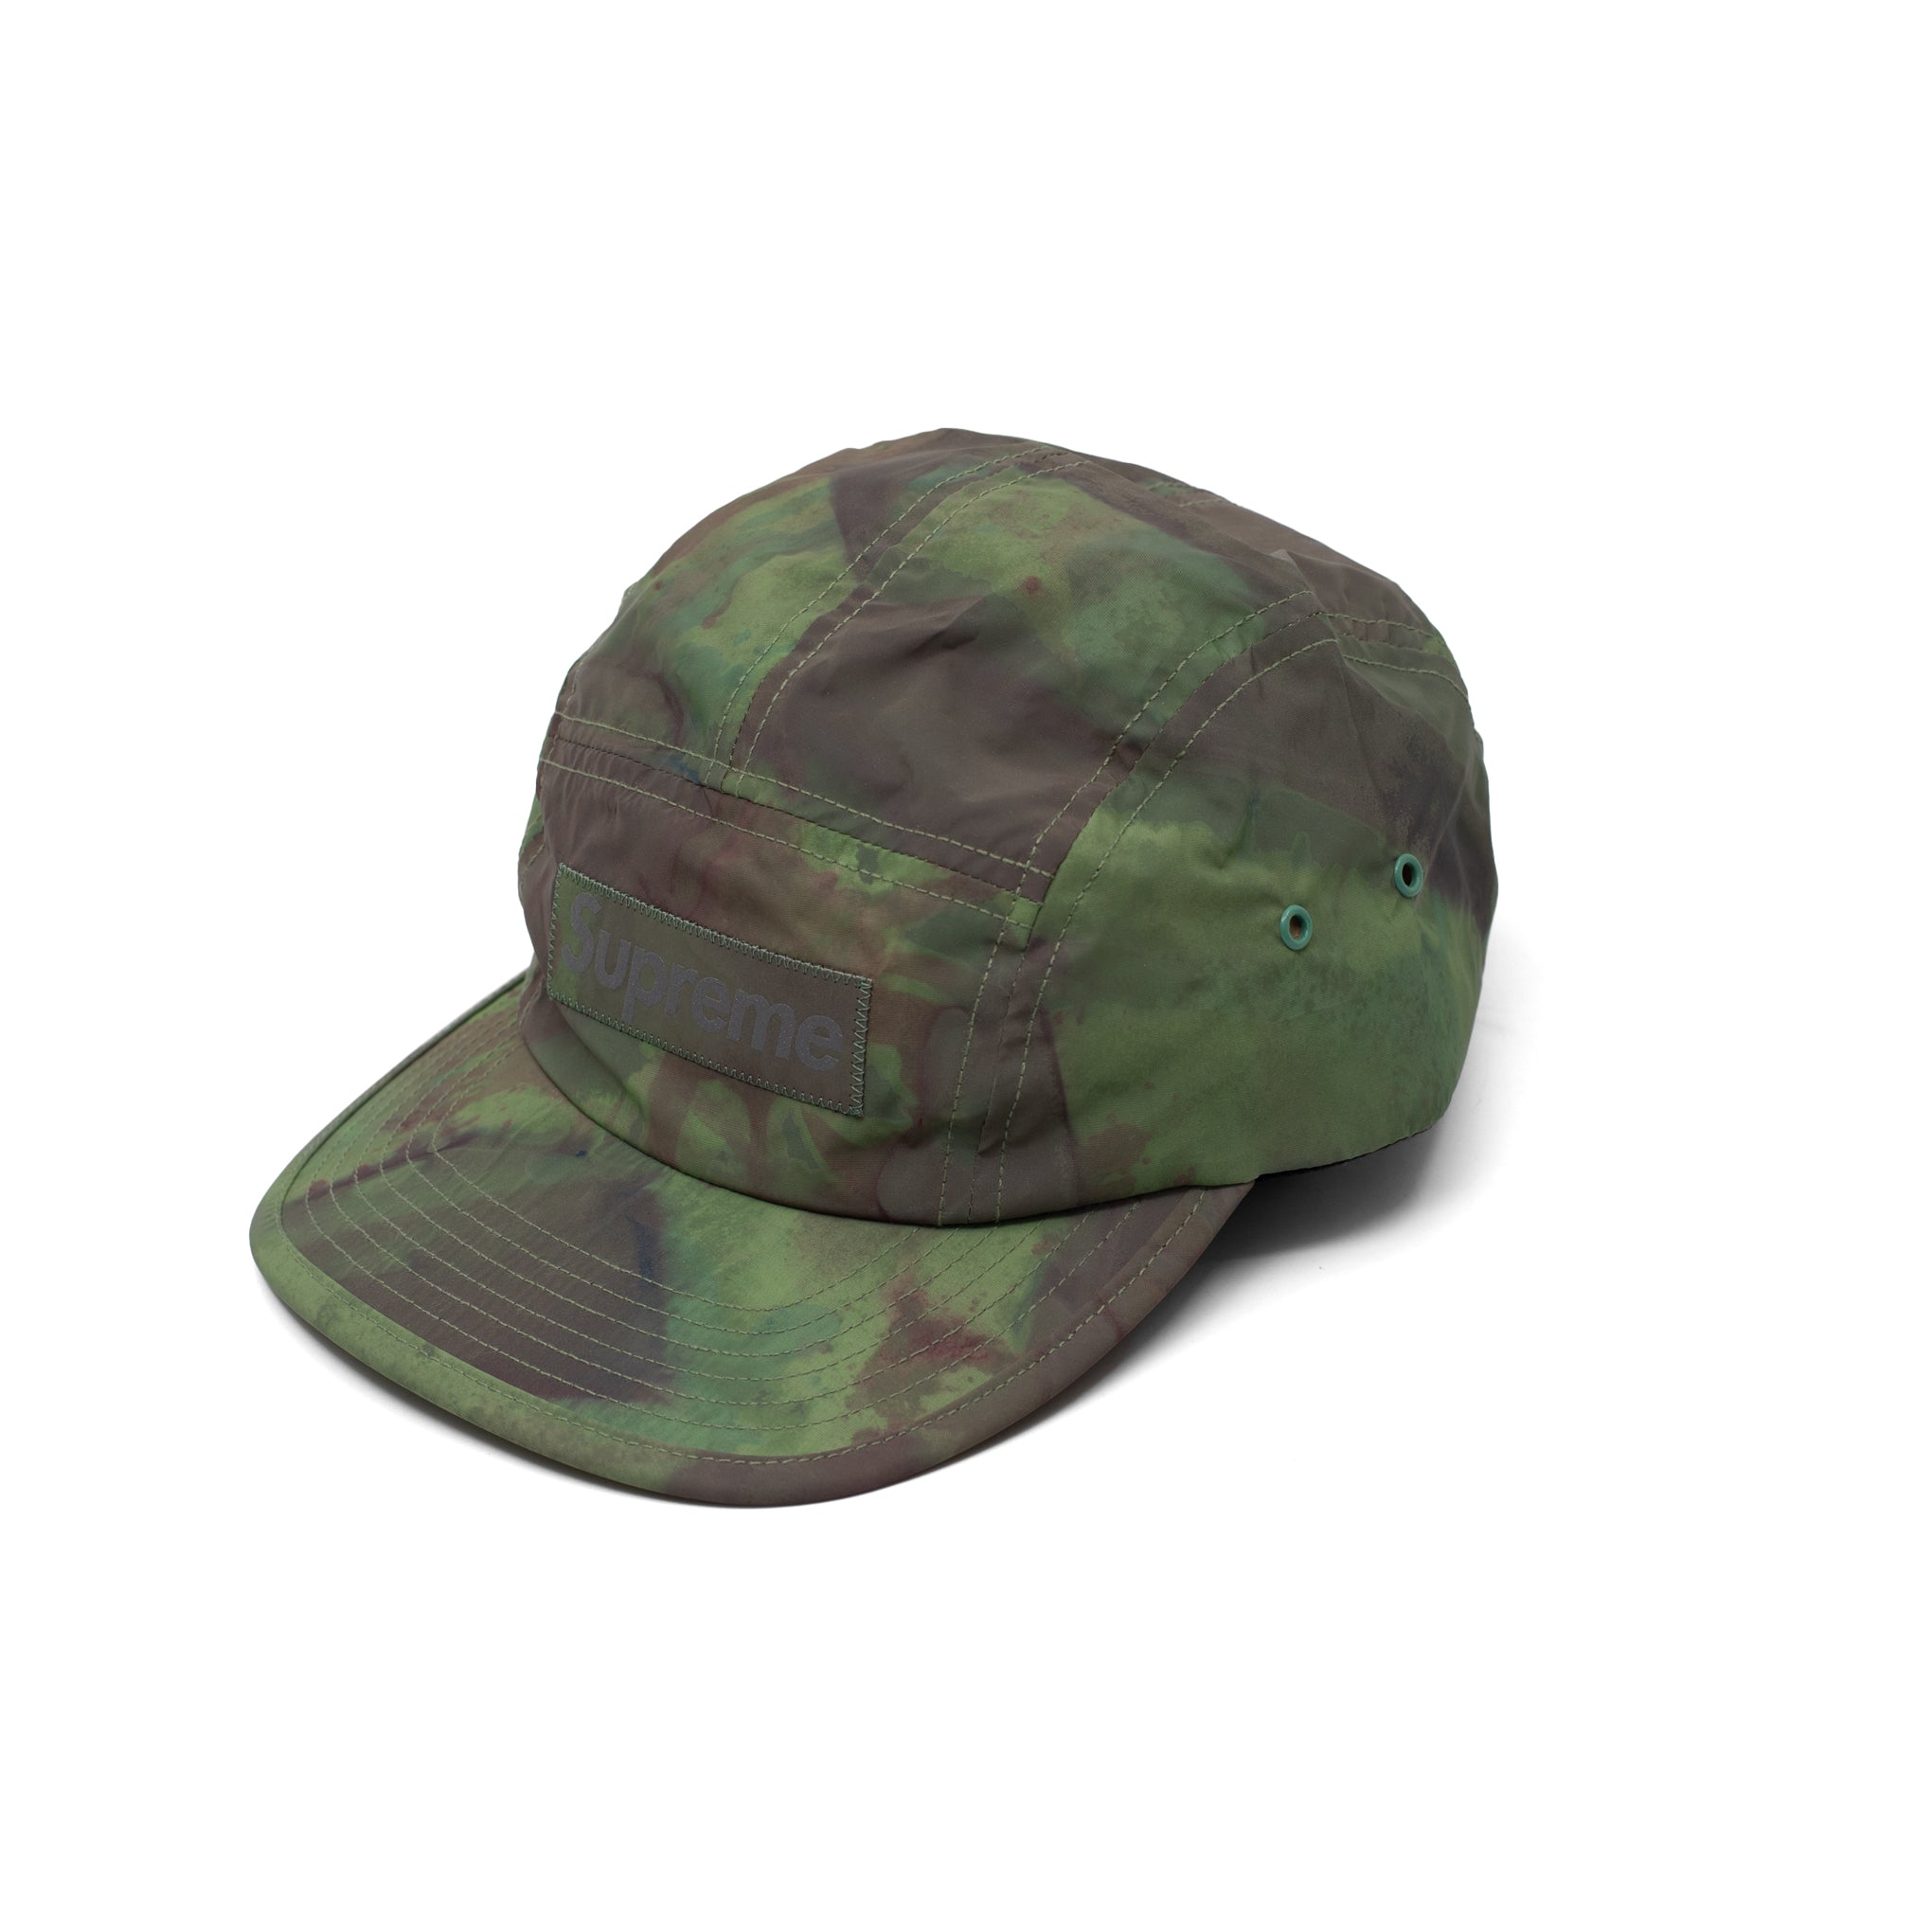 SUPREME REFLECTIVE DYED CAMP CAP GREEN